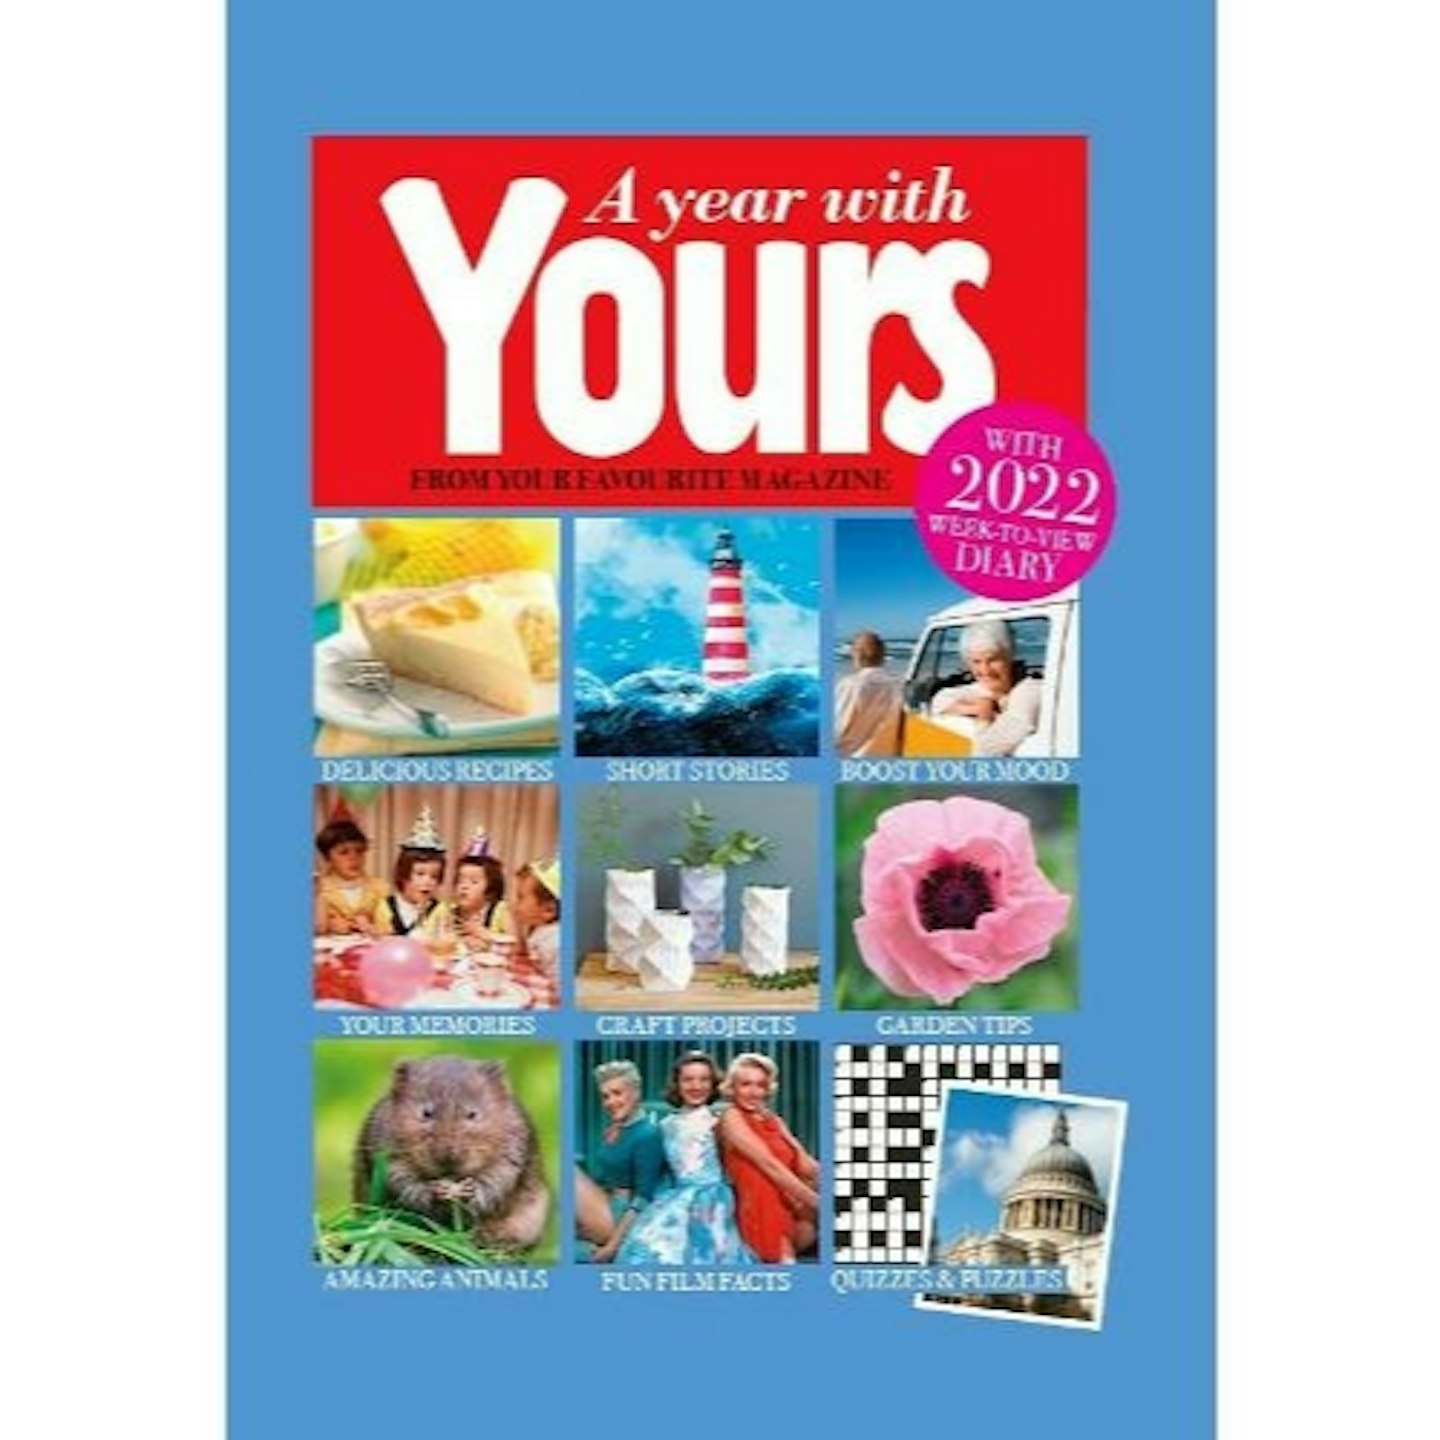 A Year with Yours Yearbook 2022